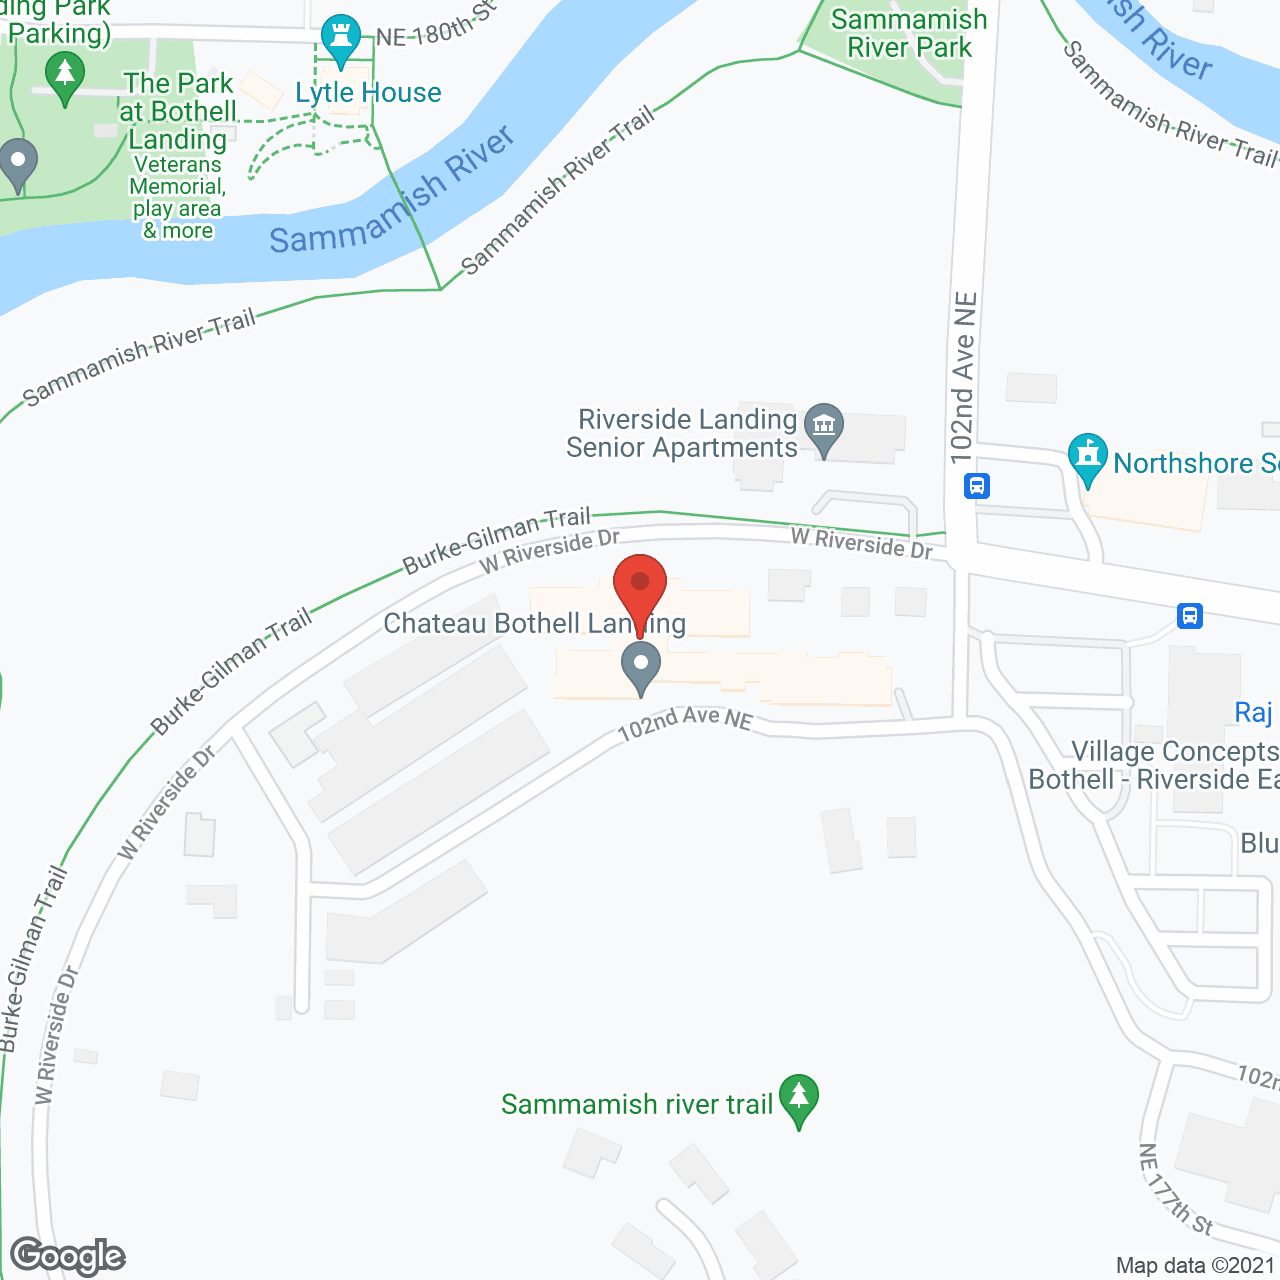 Chateau at Bothell Landing in google map